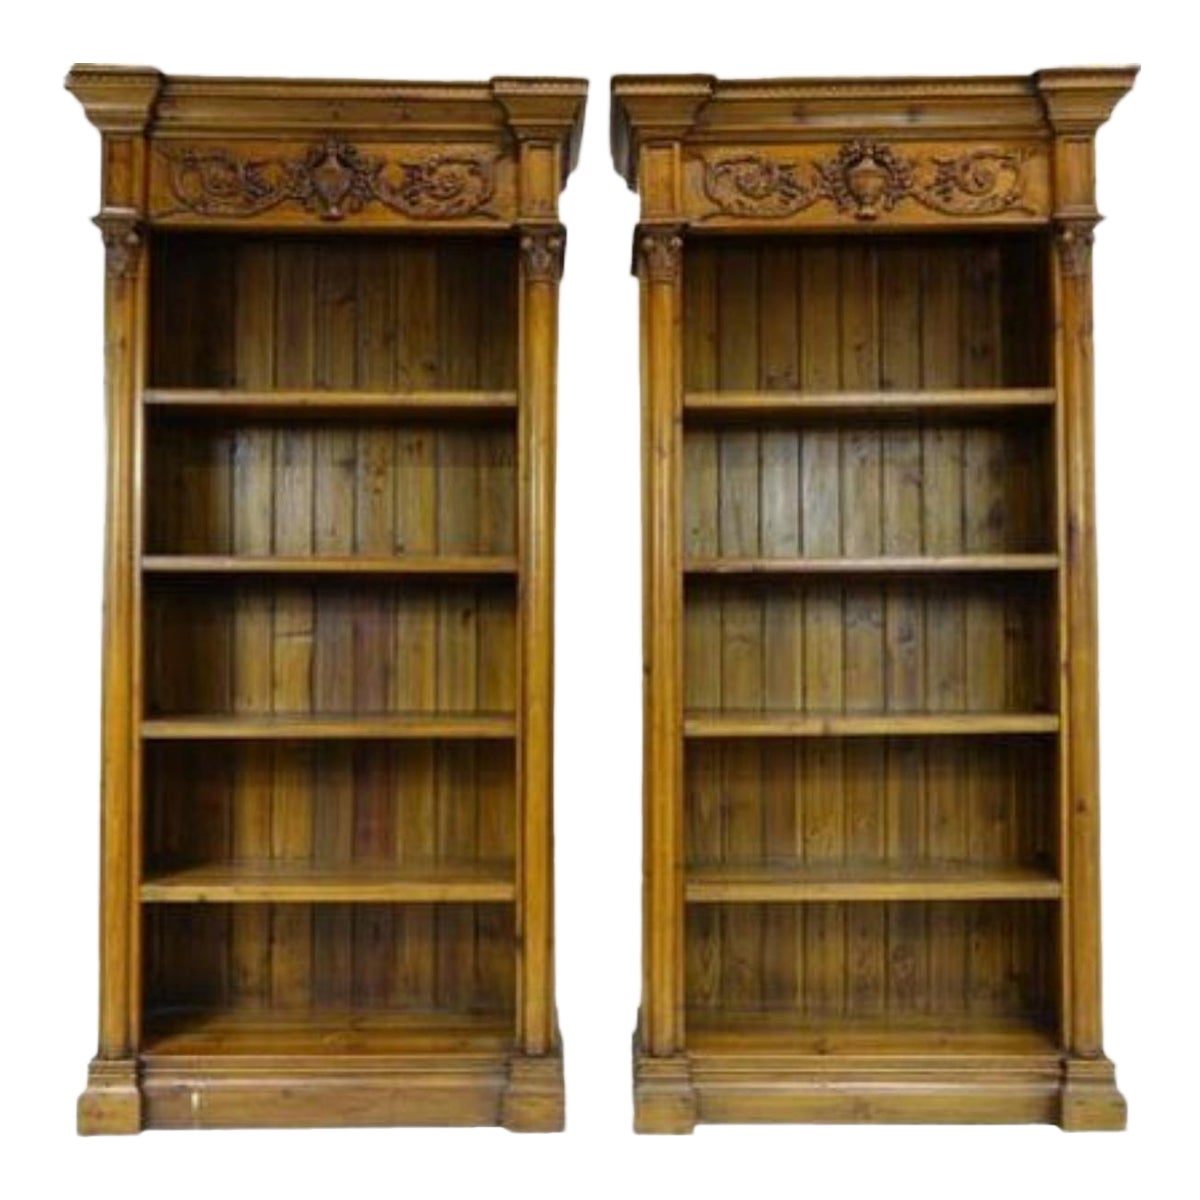 Pair of Tall Rustic Wood Carved Bookcases 